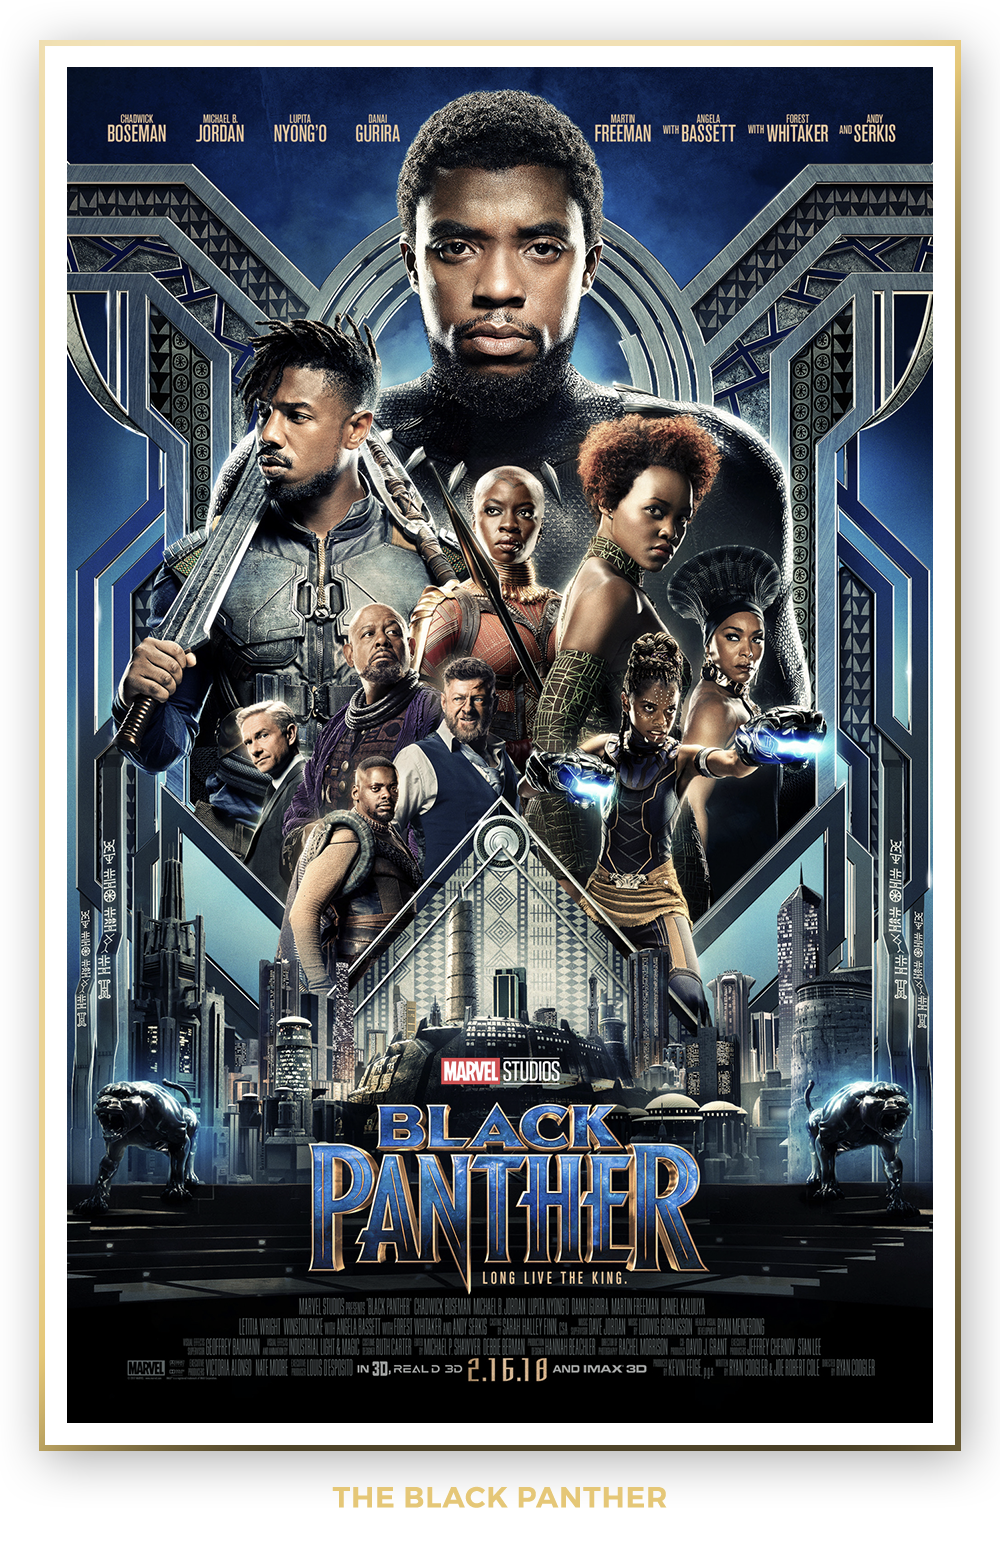 BlackPanther.png